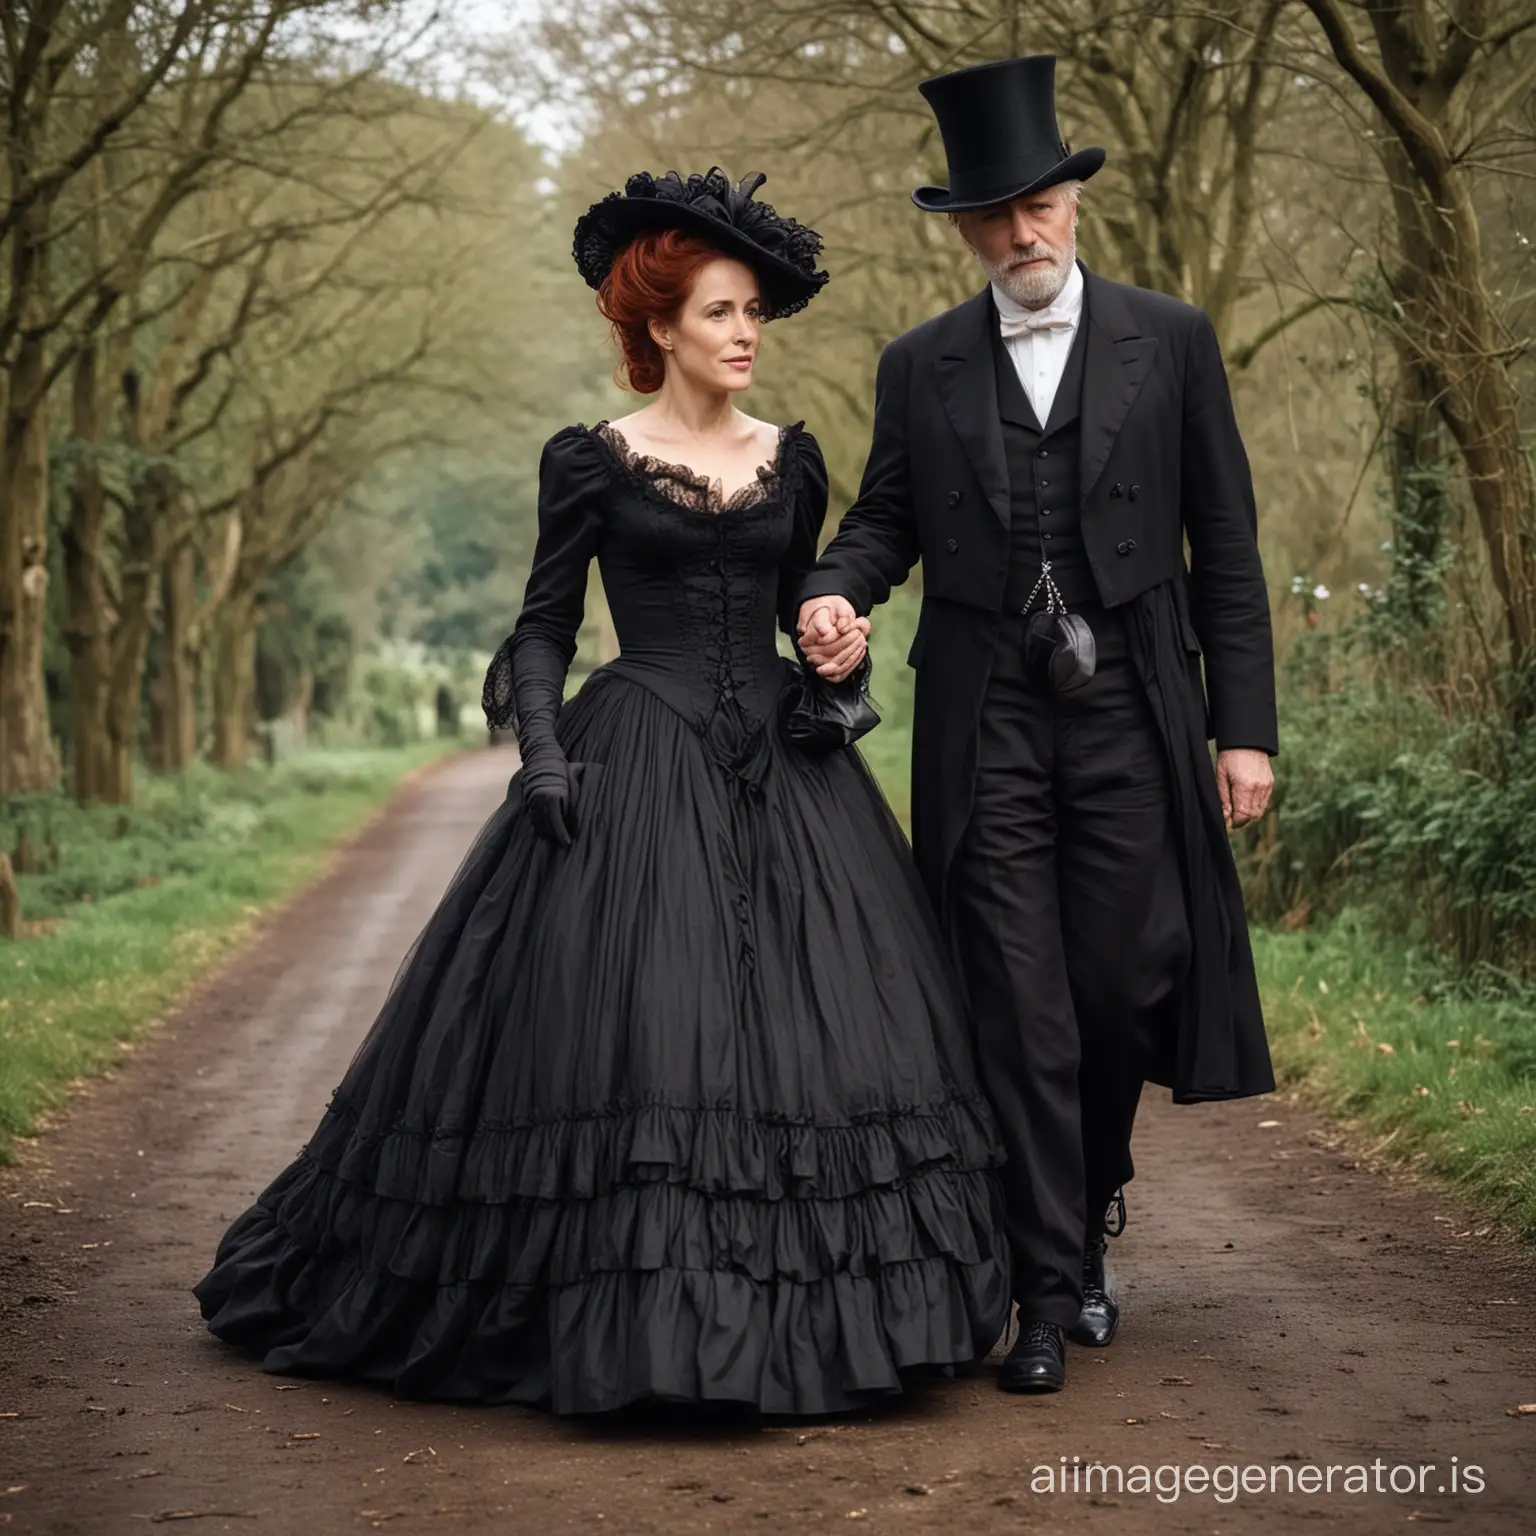 red hair Gillian Anderson wearing a dark crimson floor-length loose billowing 1860 Victorian crinoline poofy dress with a frilly bonnet walking hand in hand with an old man dressed into a black Victorian suit who seems to be her newlywed husband